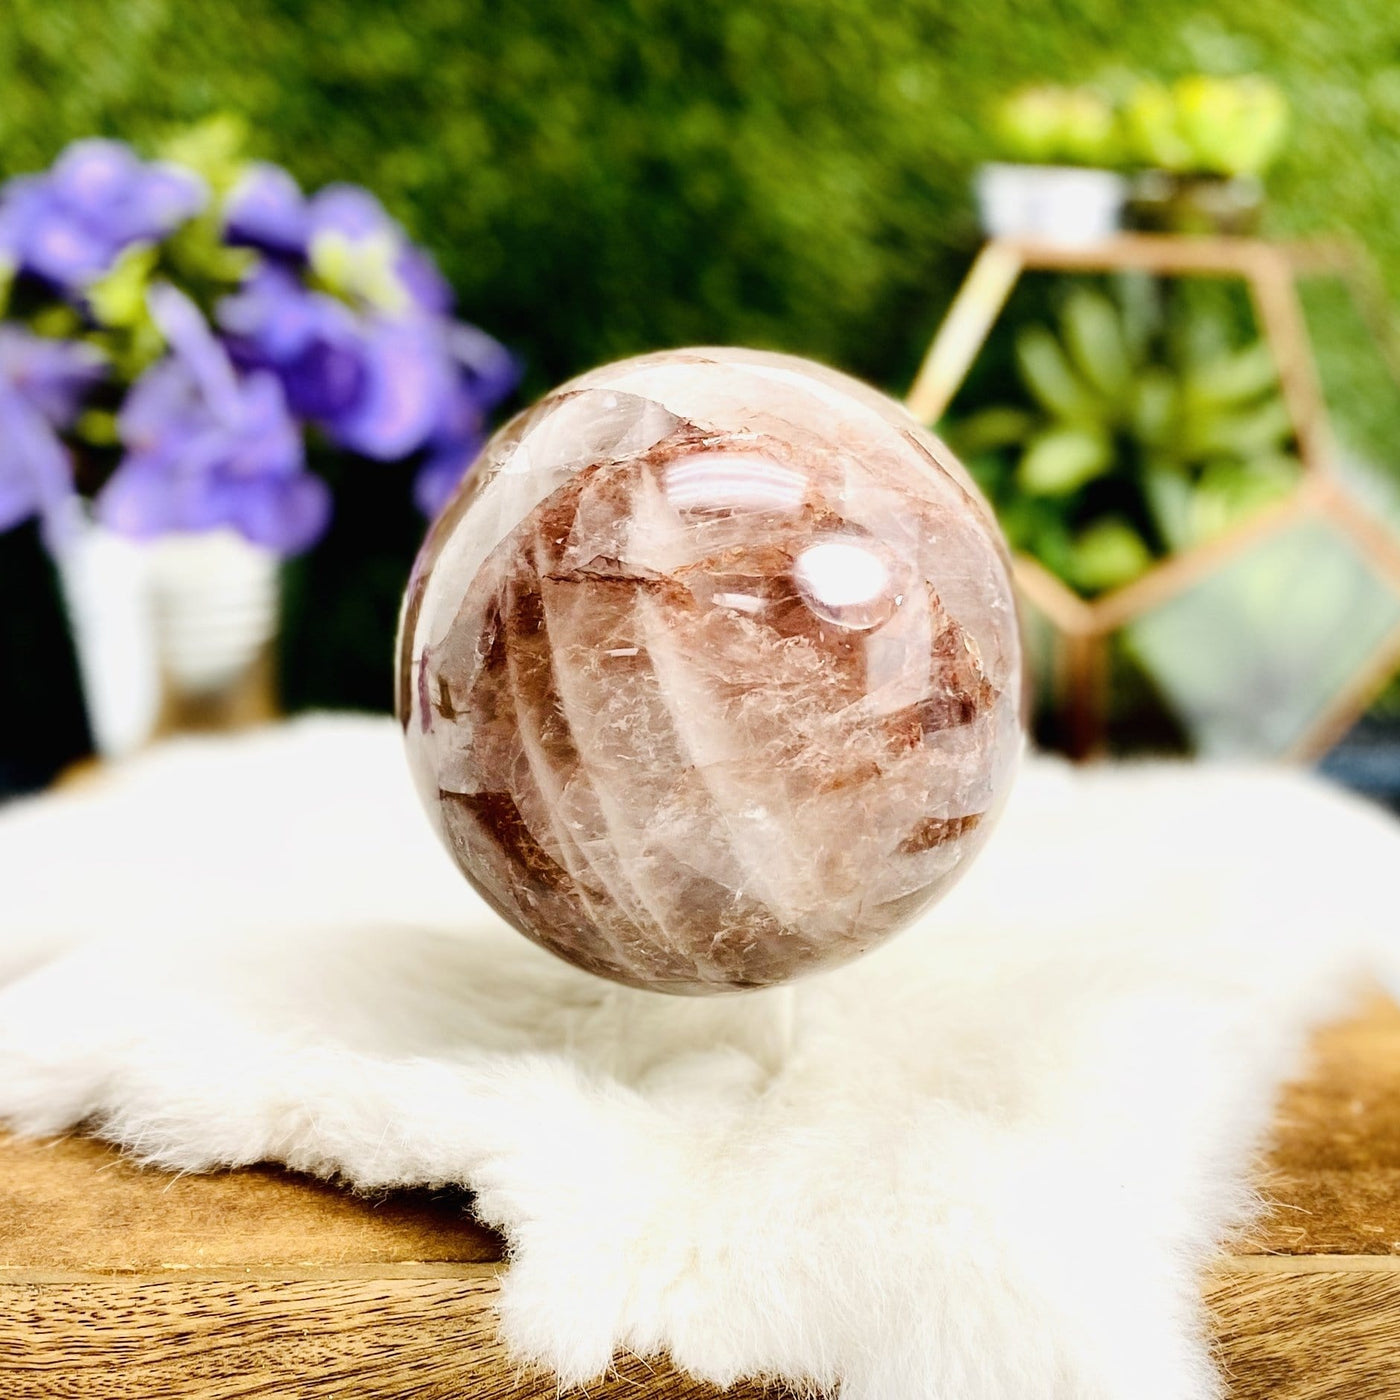 Hematoid Quartz Polished Sphere with decorations in the background